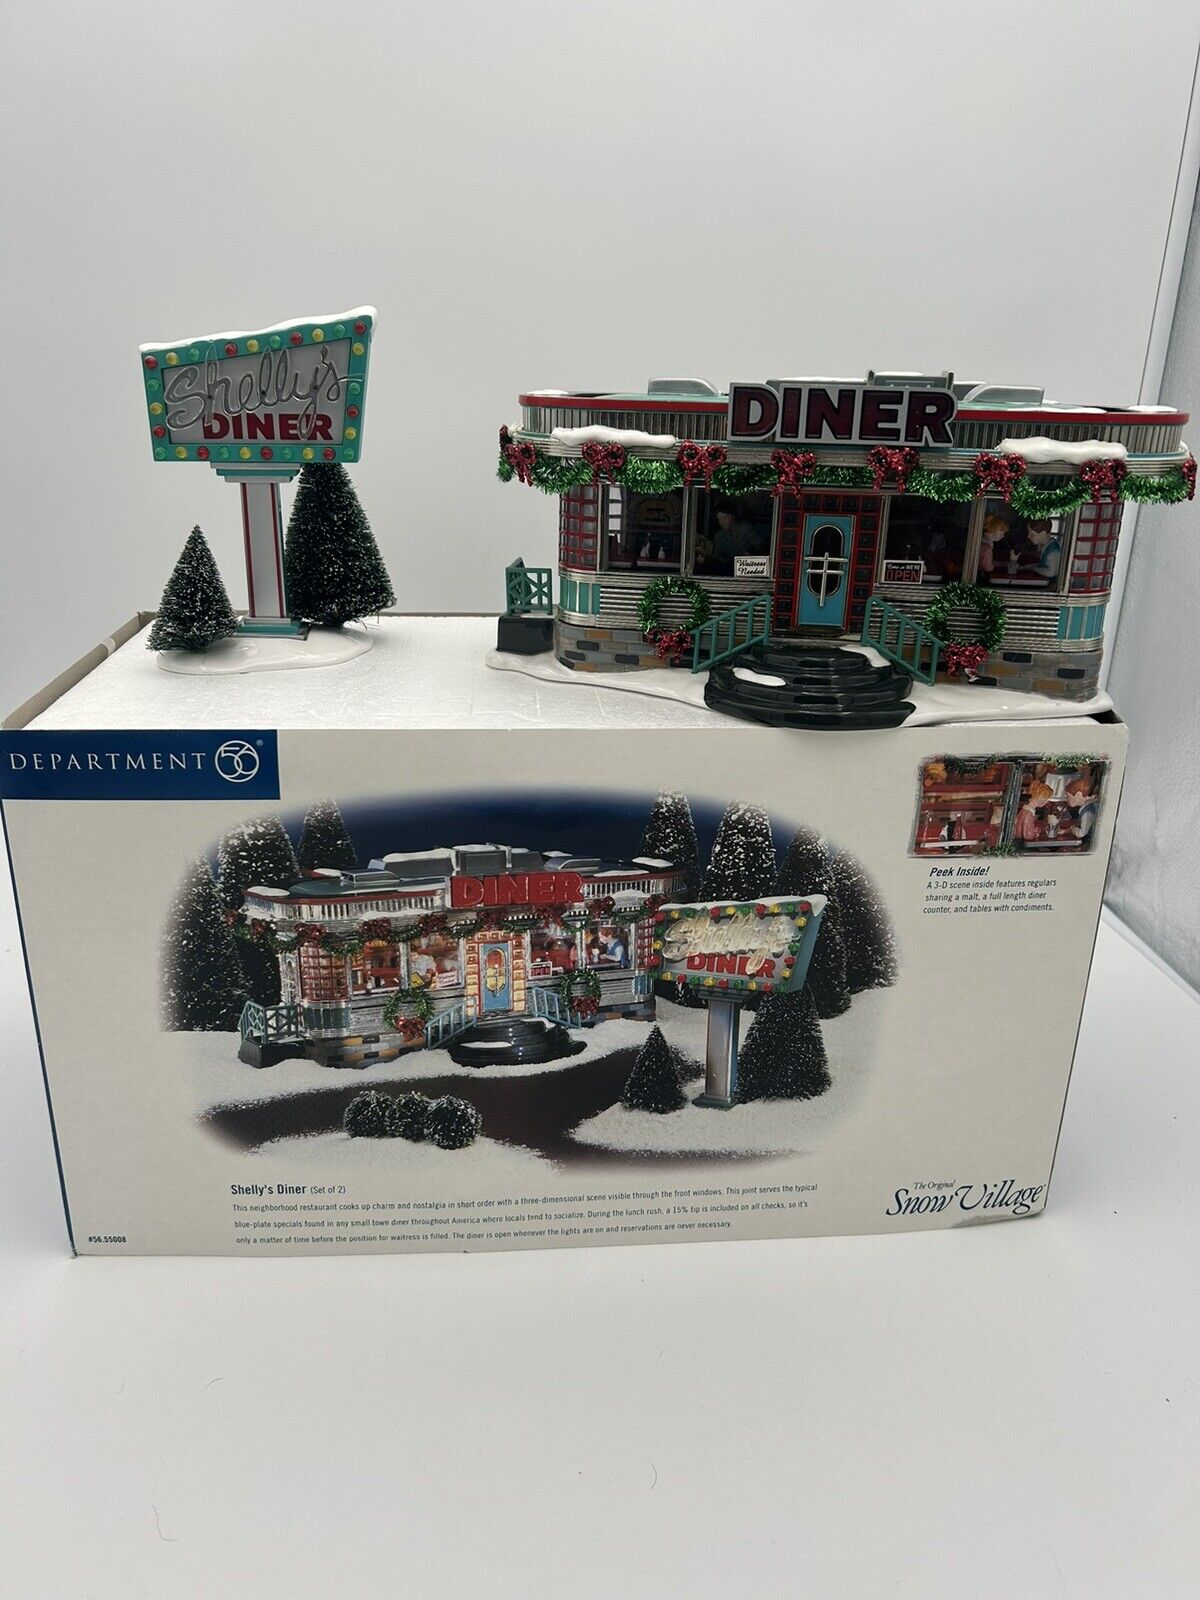 Dept 56 Christmas Snow Village Shelly\'s Diner 1999 in Box #56.55008 Tested